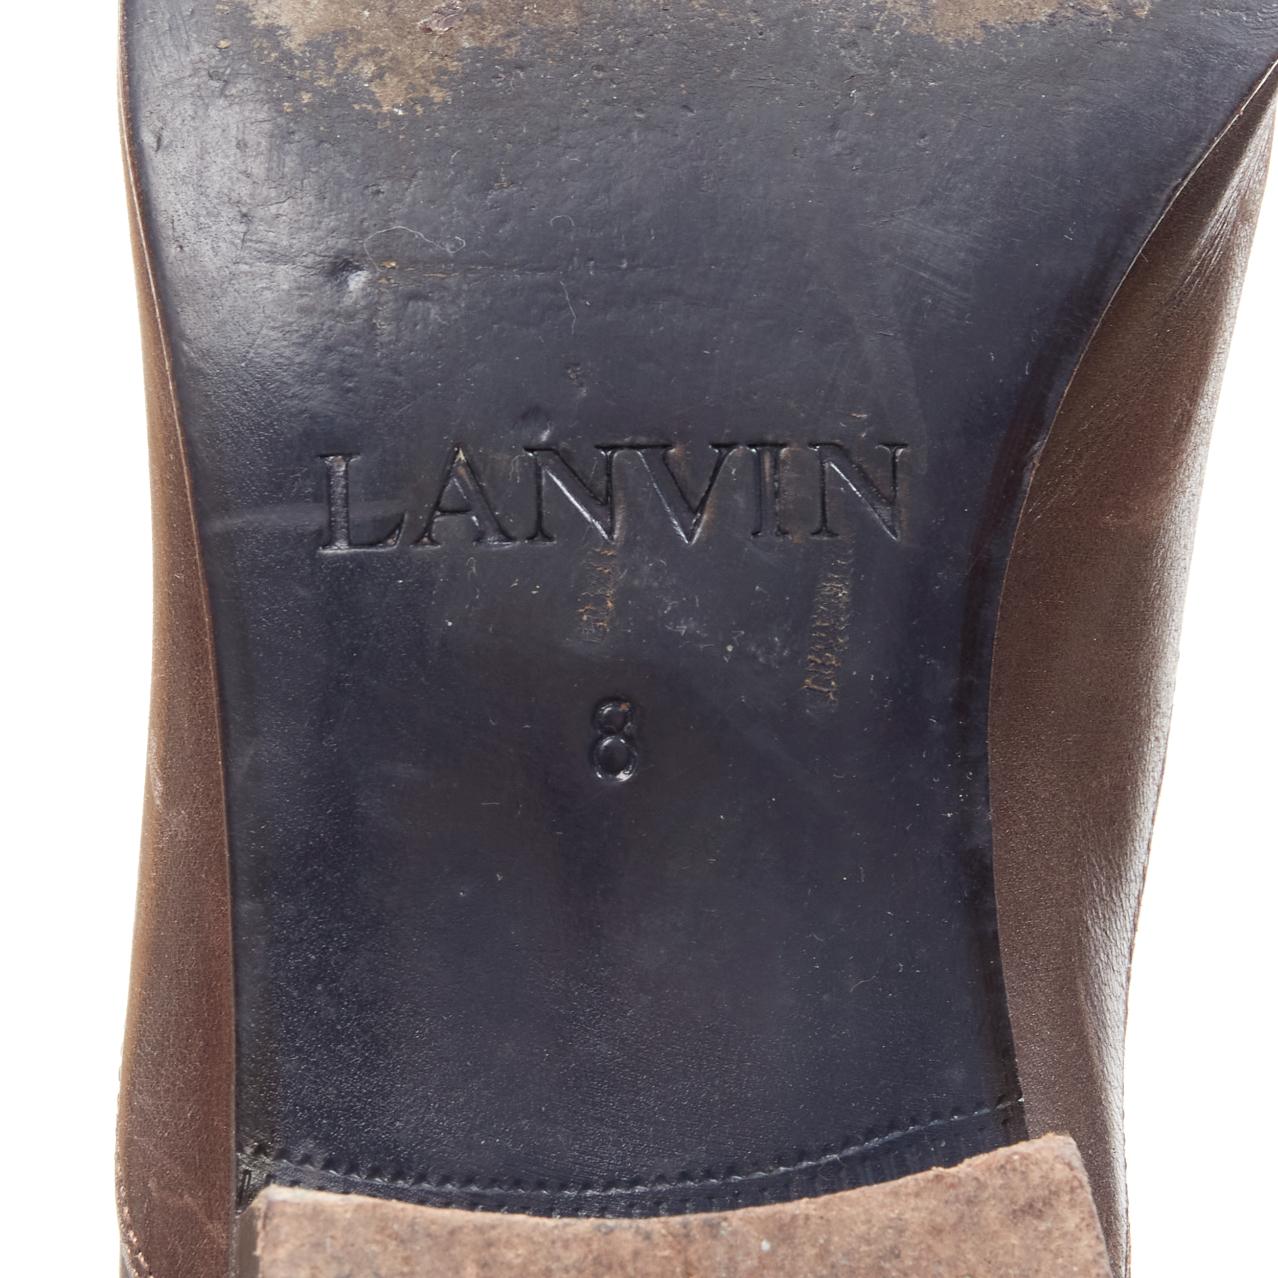 LANVIN brown calfskin lace up distressed scuffed leather dress shoes US8 EU41 For Sale 6